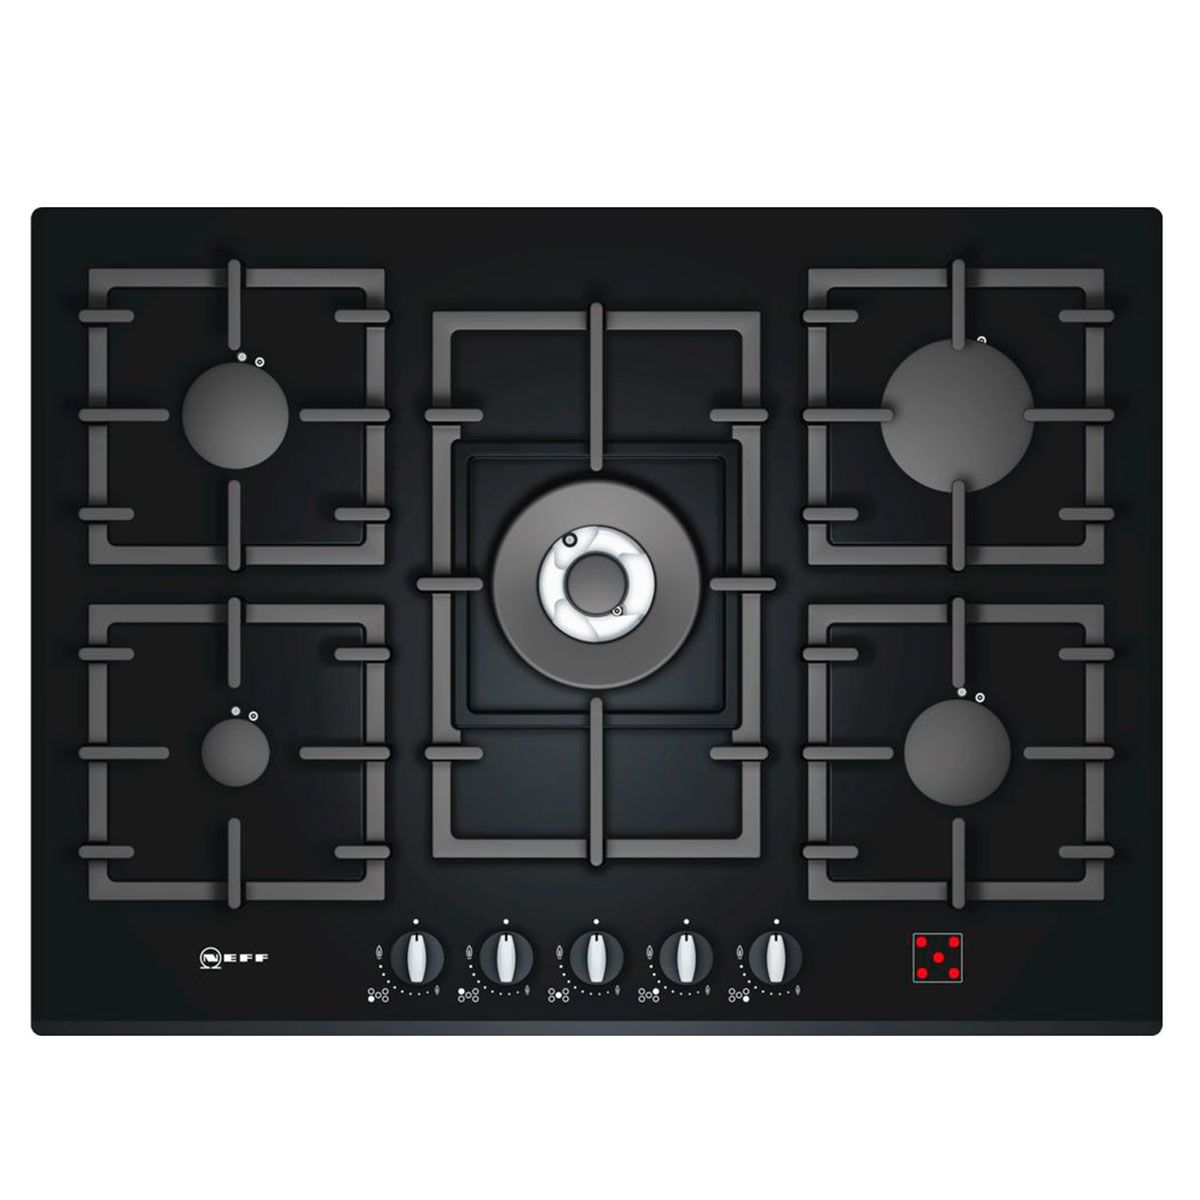 Neff T63r46s1 Gas Hob Review